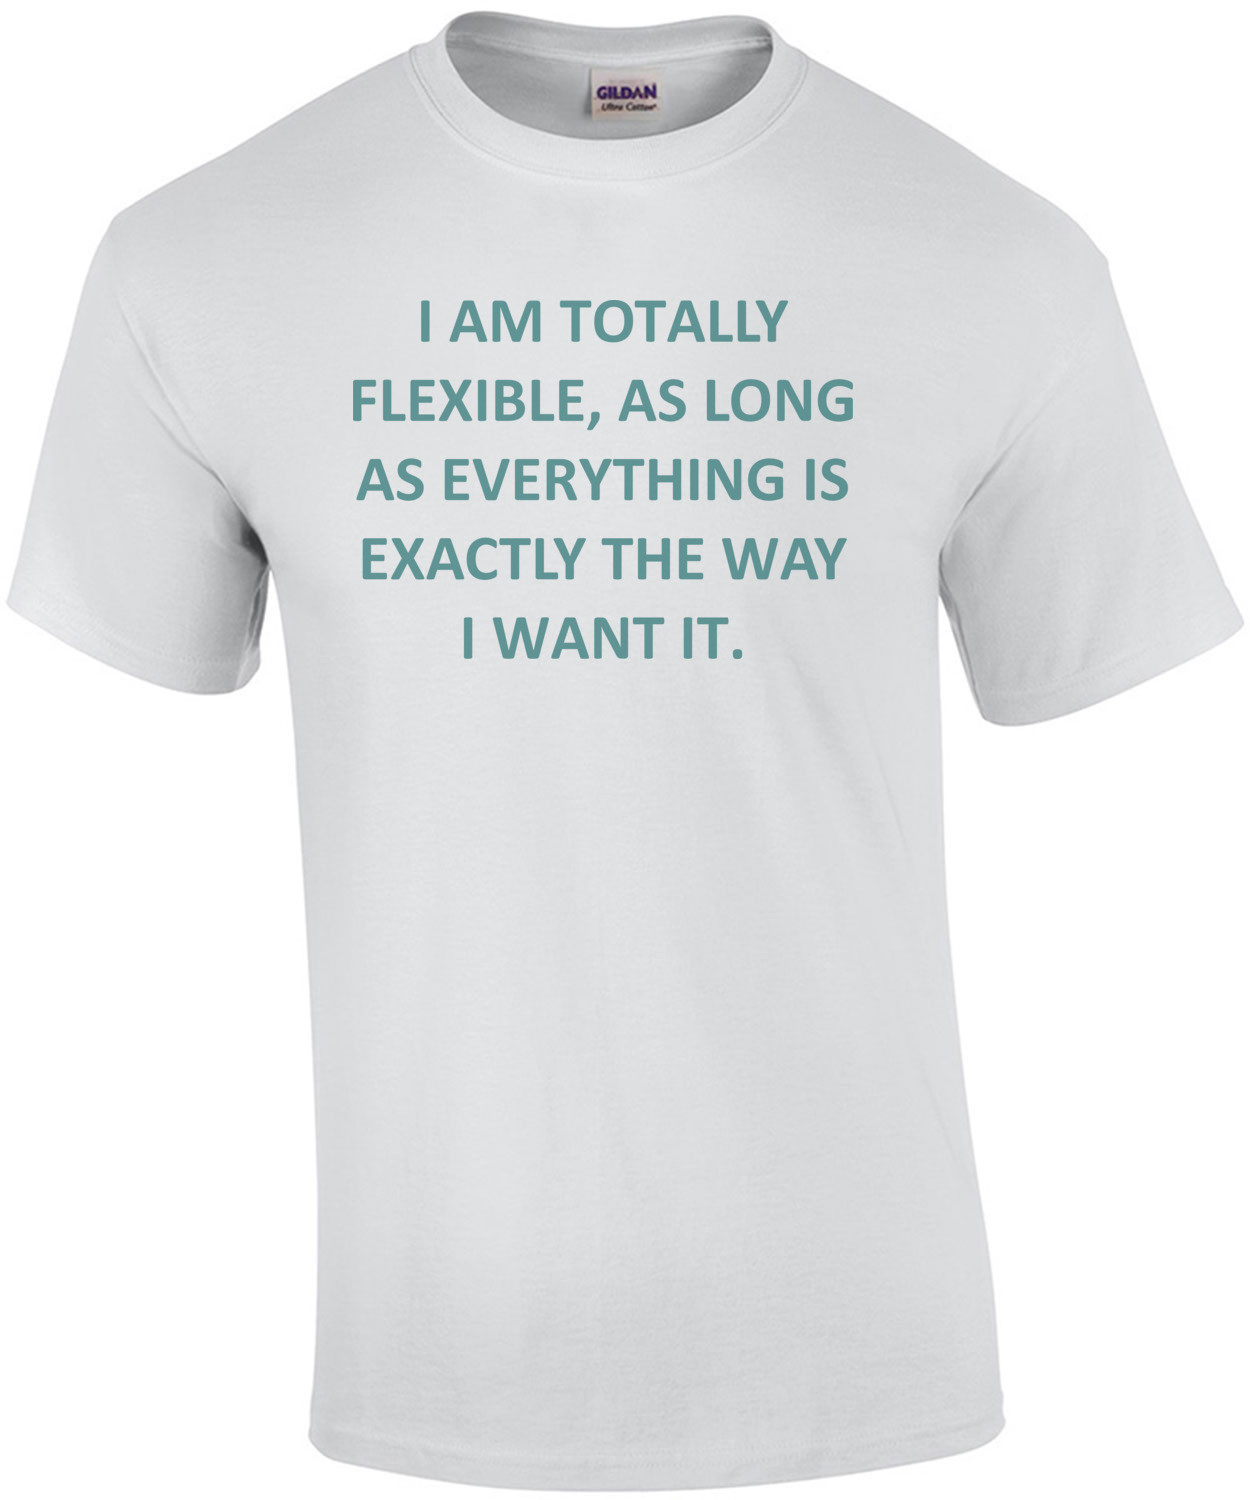 I AM TOTALLY FLEXIBLE, AS LONG AS EVERYTHING IS EXACTLY THE WAY I WANT IT. Funny T-Shirt Shirt